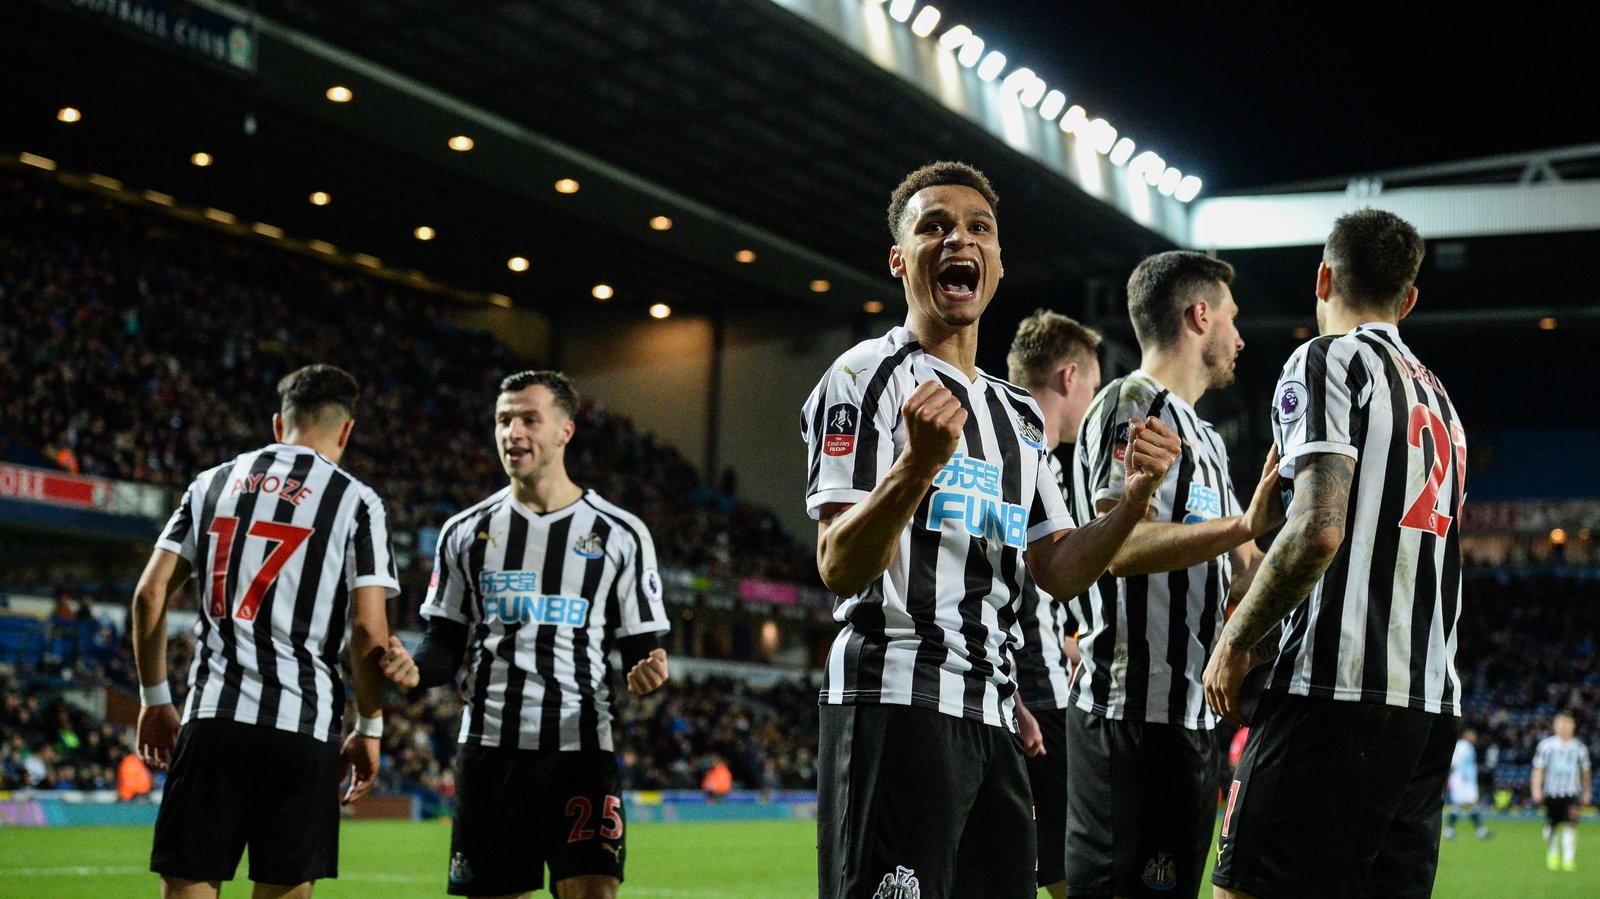 Newcastle battle past Blackburn after extra-time